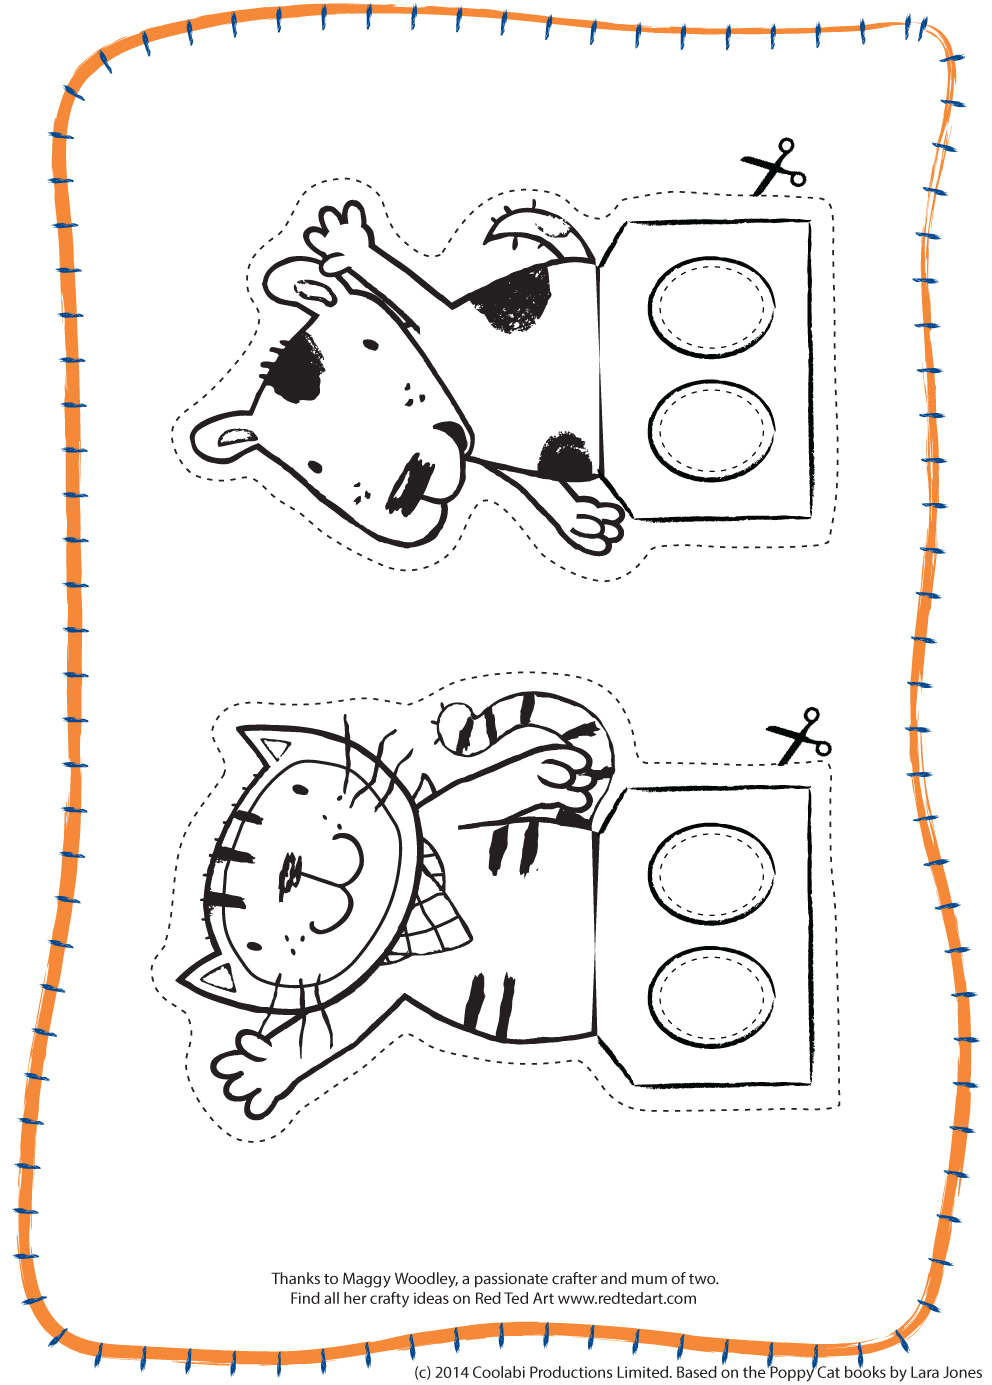 World Cup Crafts - Poppy Cat Finger Football - Red Ted Art&amp;#039;s Blog - Free Printable Finger Puppet Templates